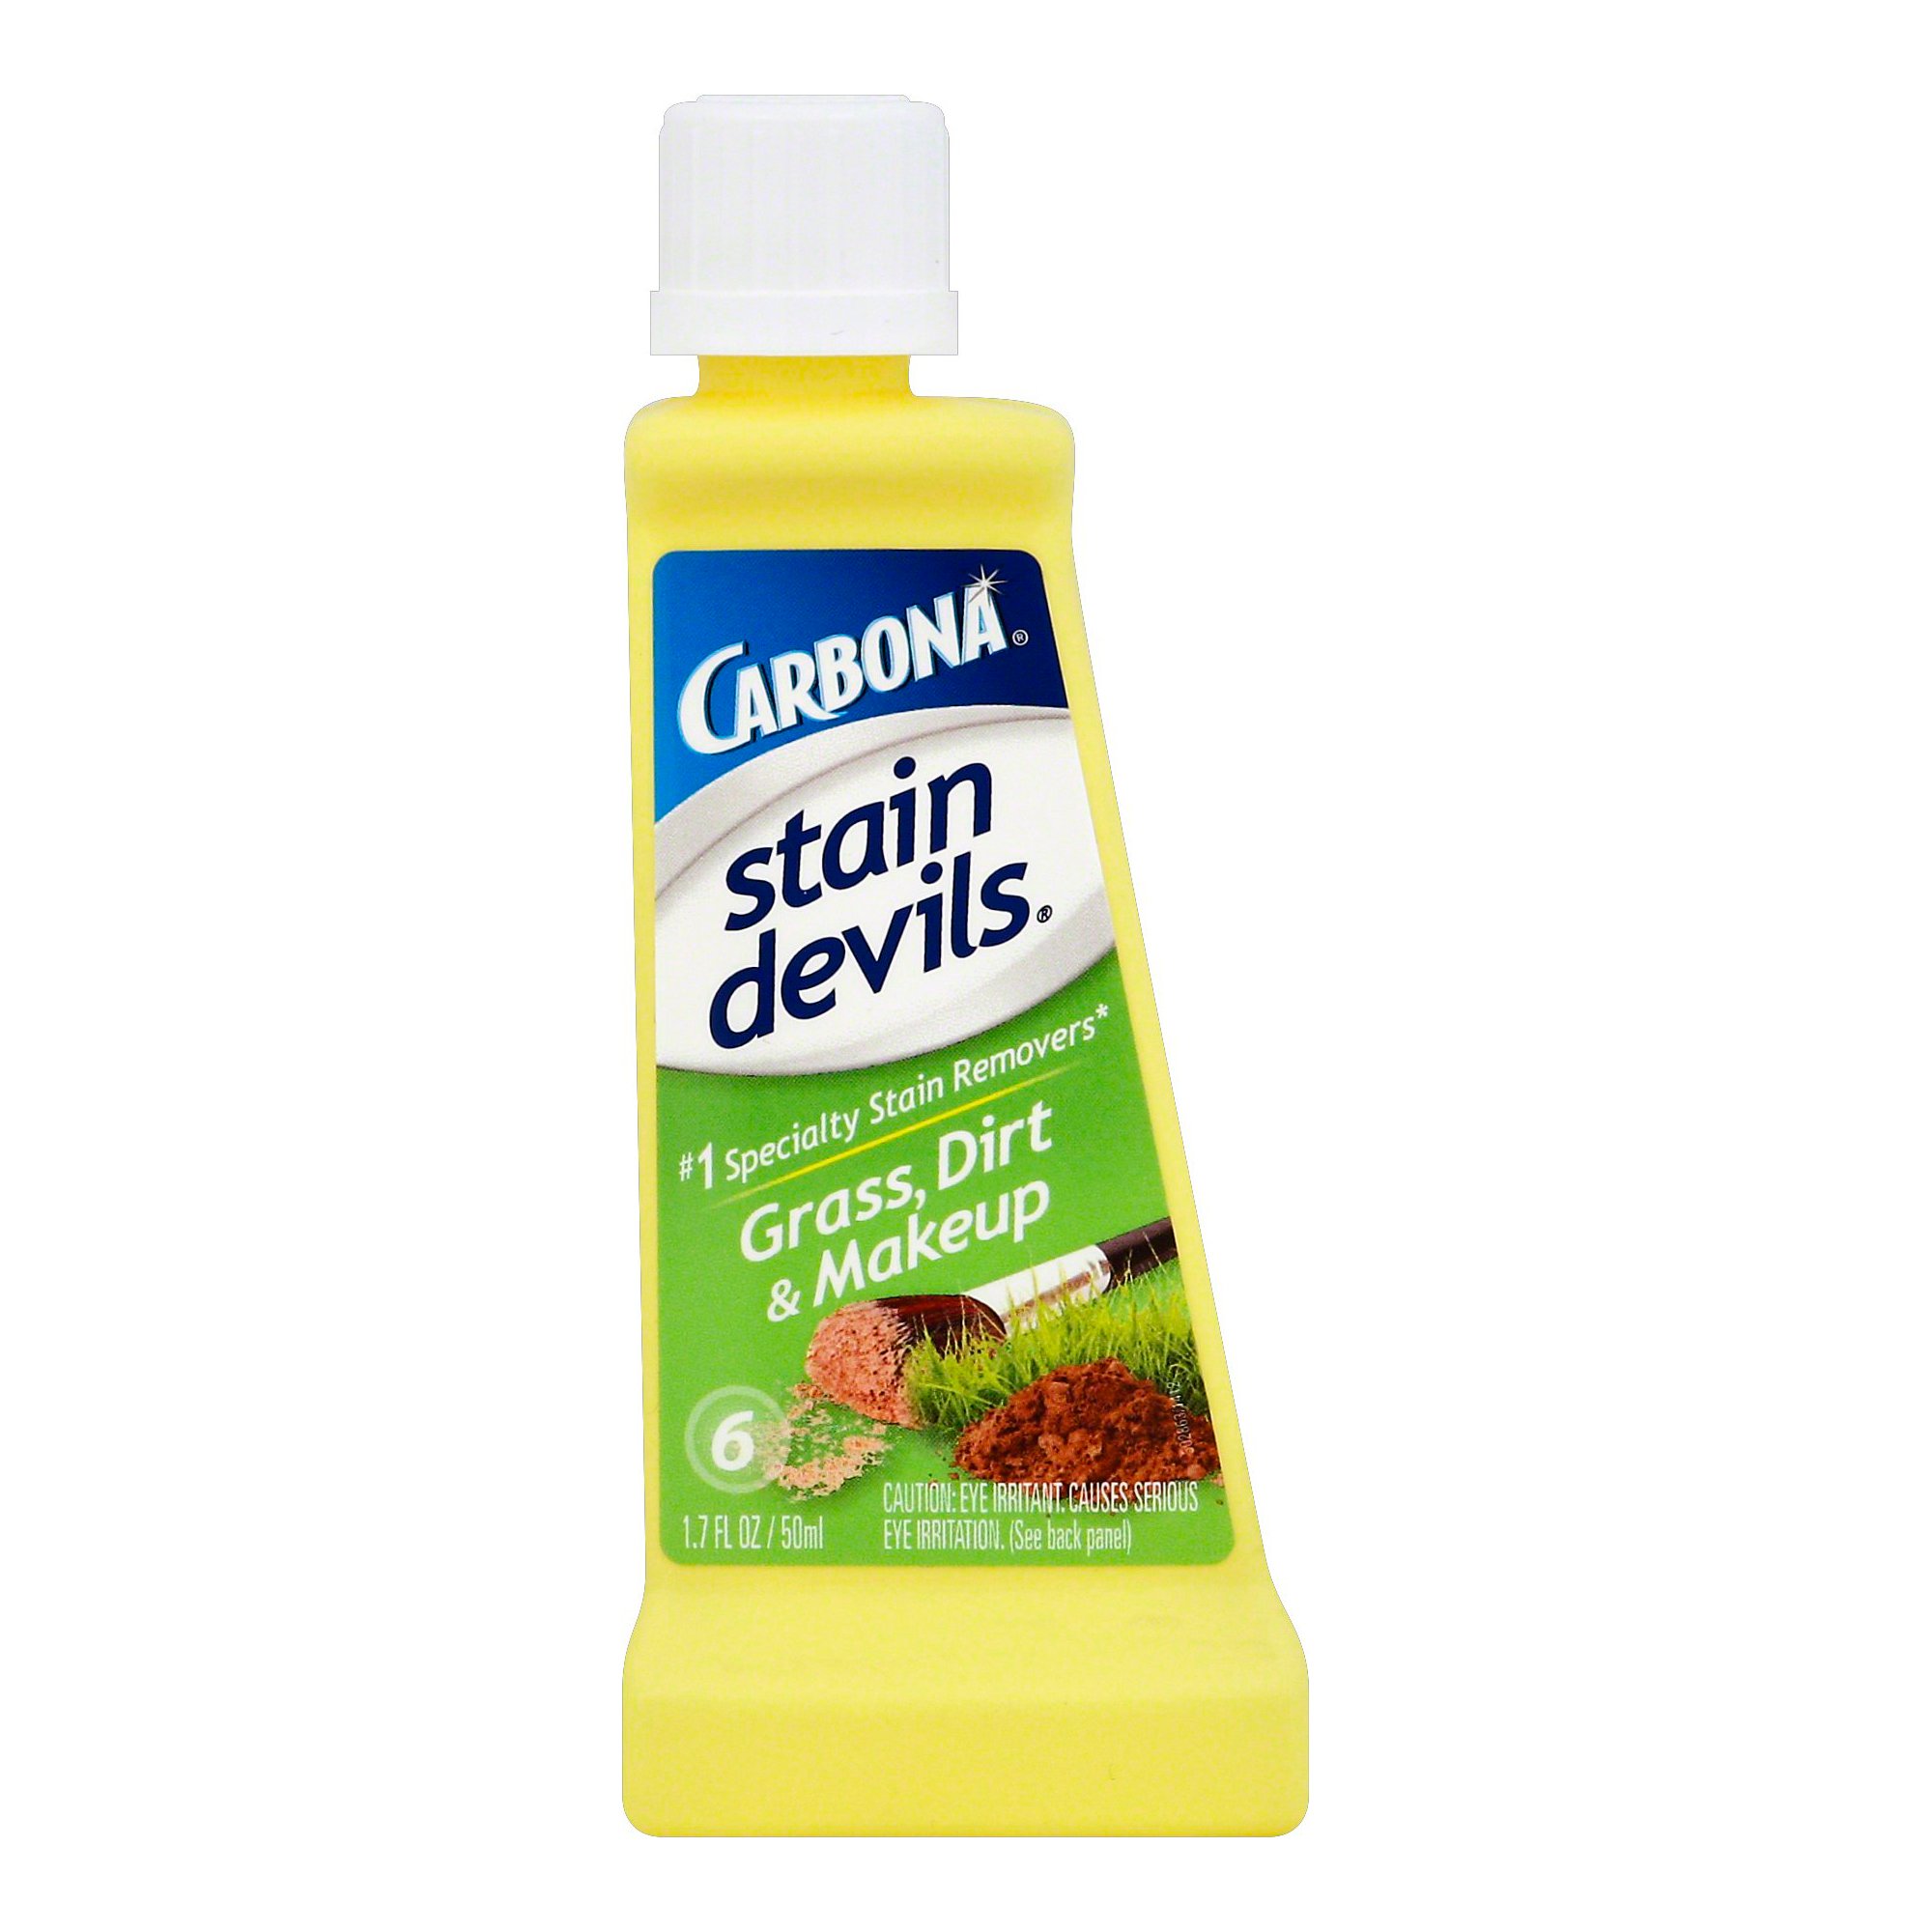 Carbona Stain Devils Grass Dirt & Makeup Stain Remover - Shop